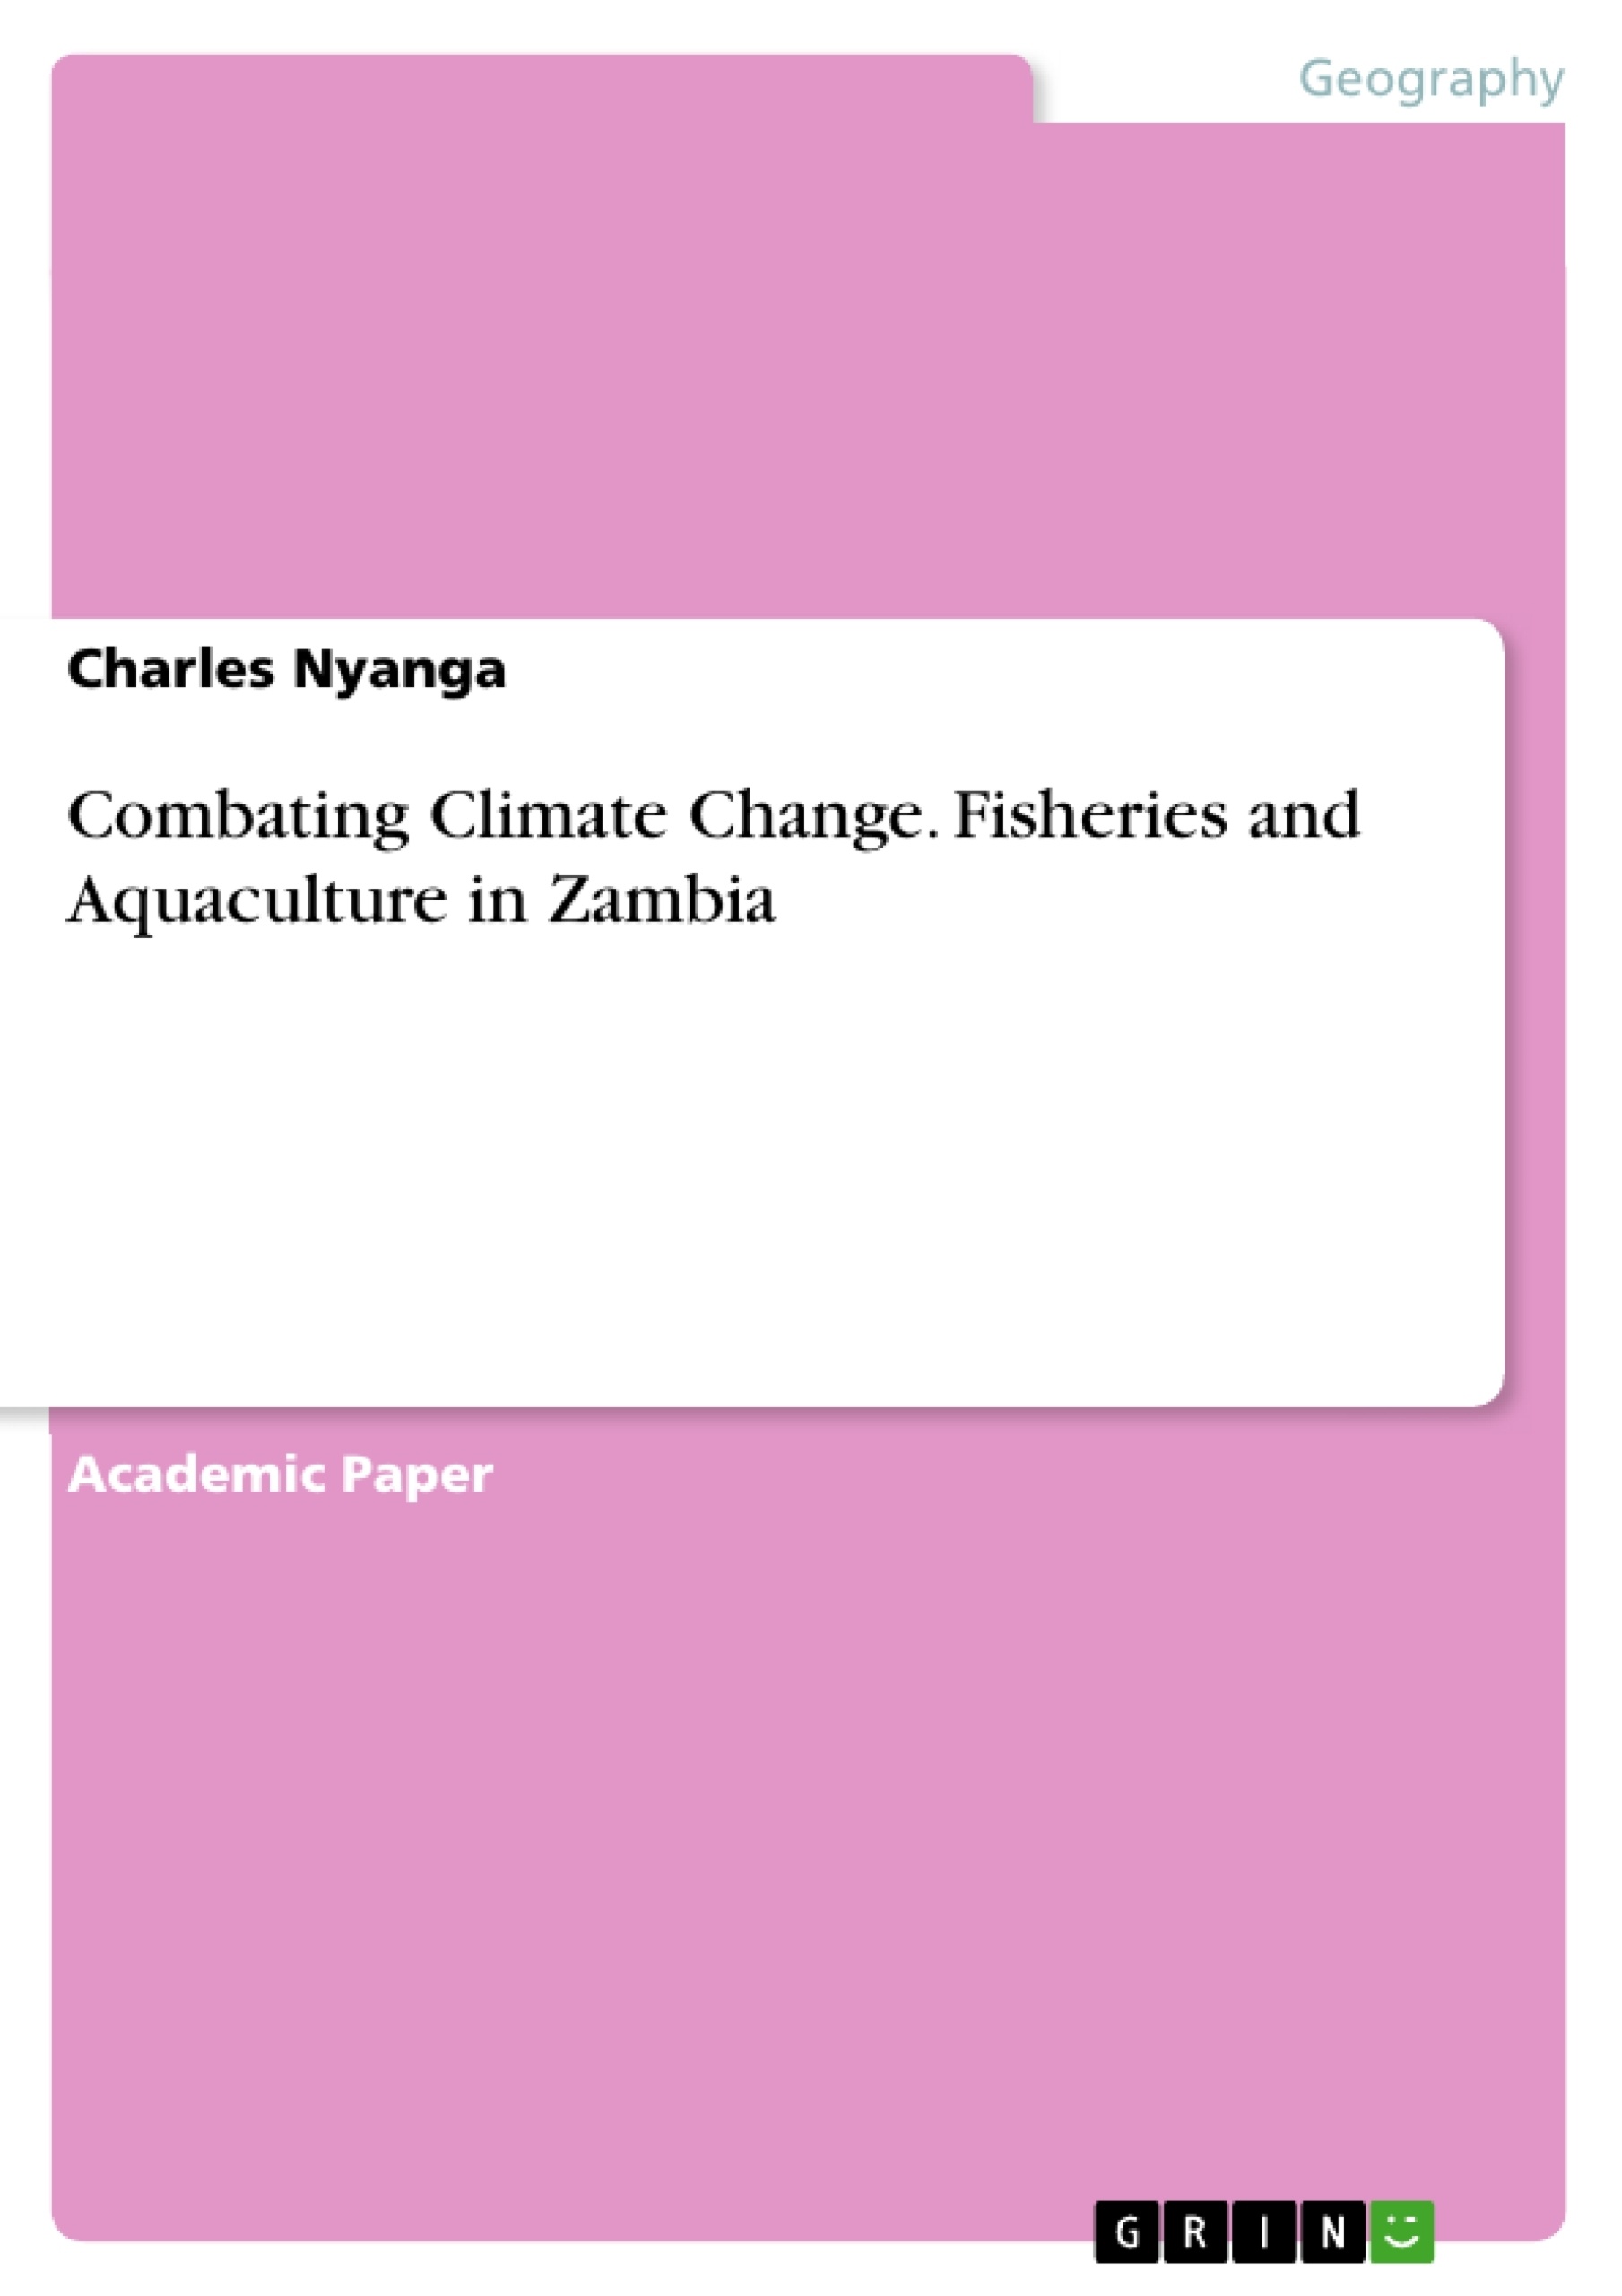 Título: Combating Climate Change. Fisheries and Aquaculture in Zambia